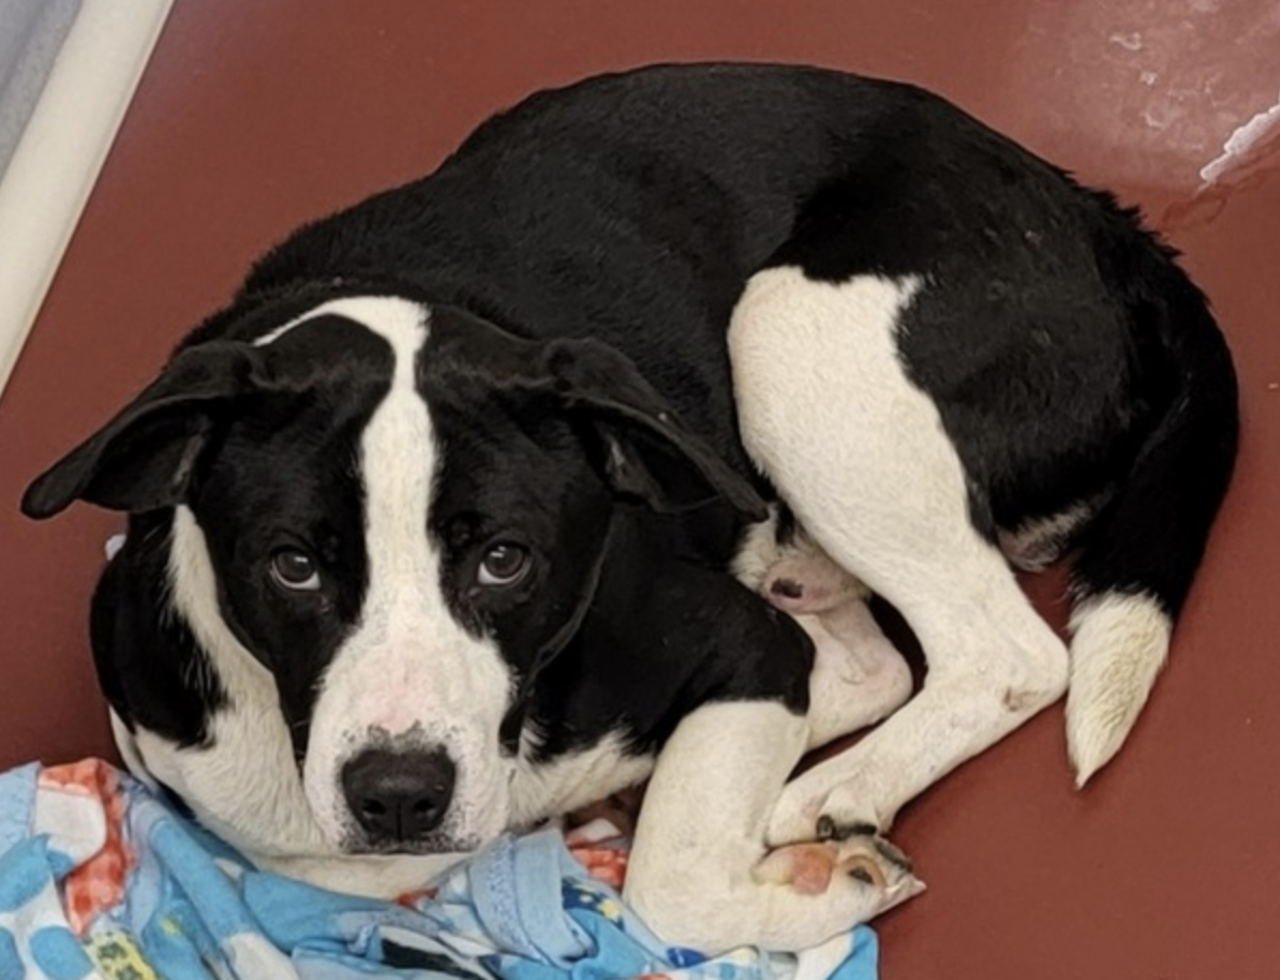 Oberon
Age: 1 year old / Breed: Hound Cross / Sex: Male
Oberon is an adorable hound mix who is healthy, up-to-date on his vaccines and neutered.